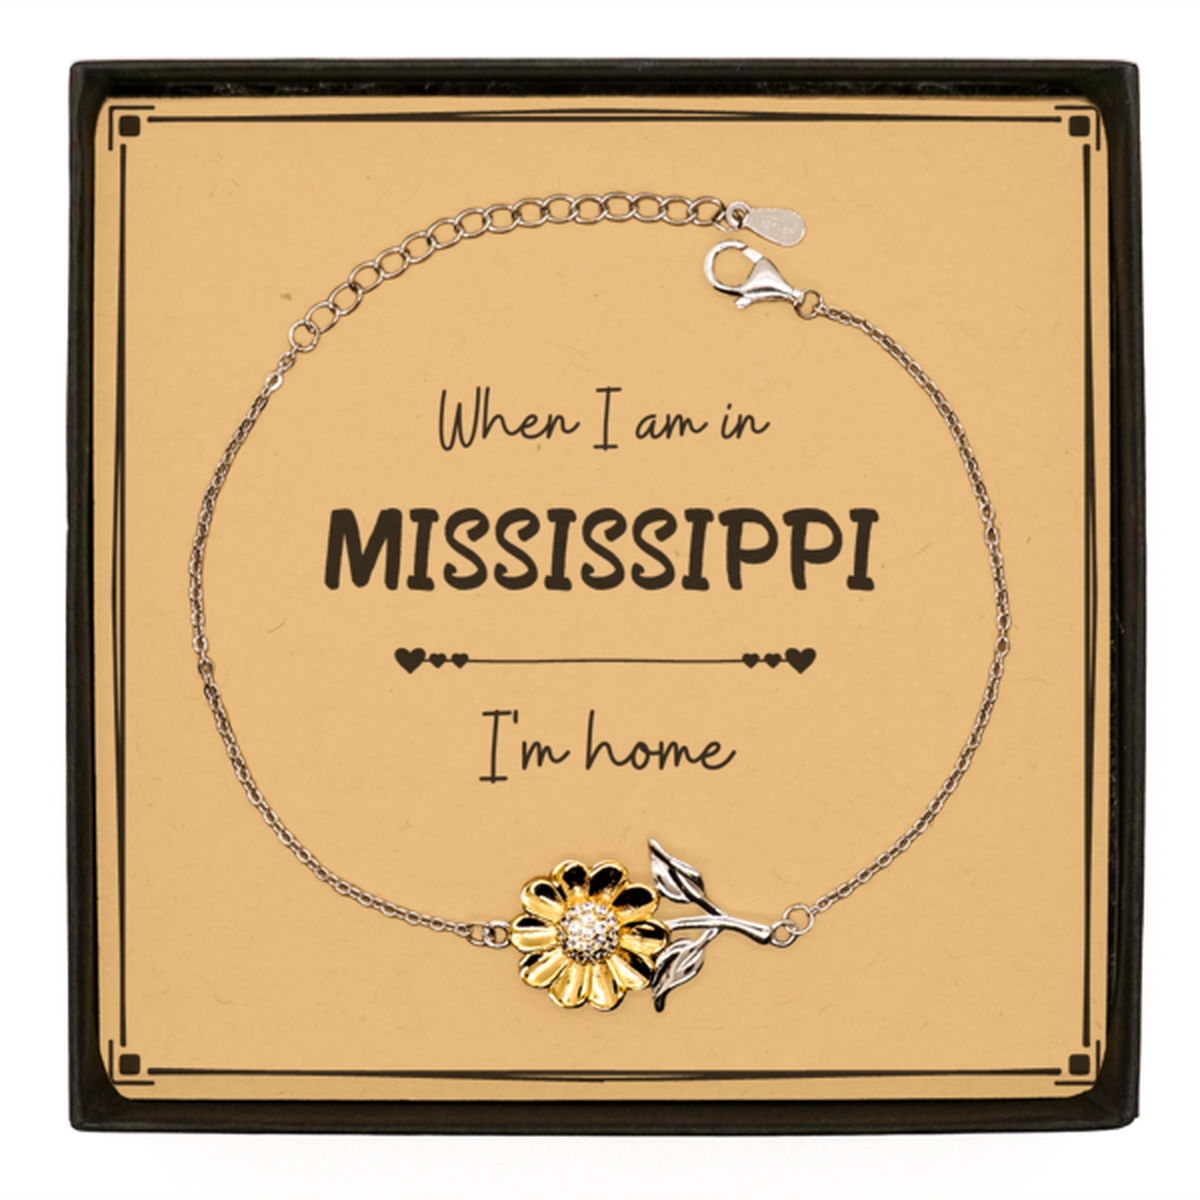 When I am in Mississippi I'm home Sunflower Bracelet, Message Card Gifts For Mississippi, State Mississippi Birthday Gifts for Friends Coworker